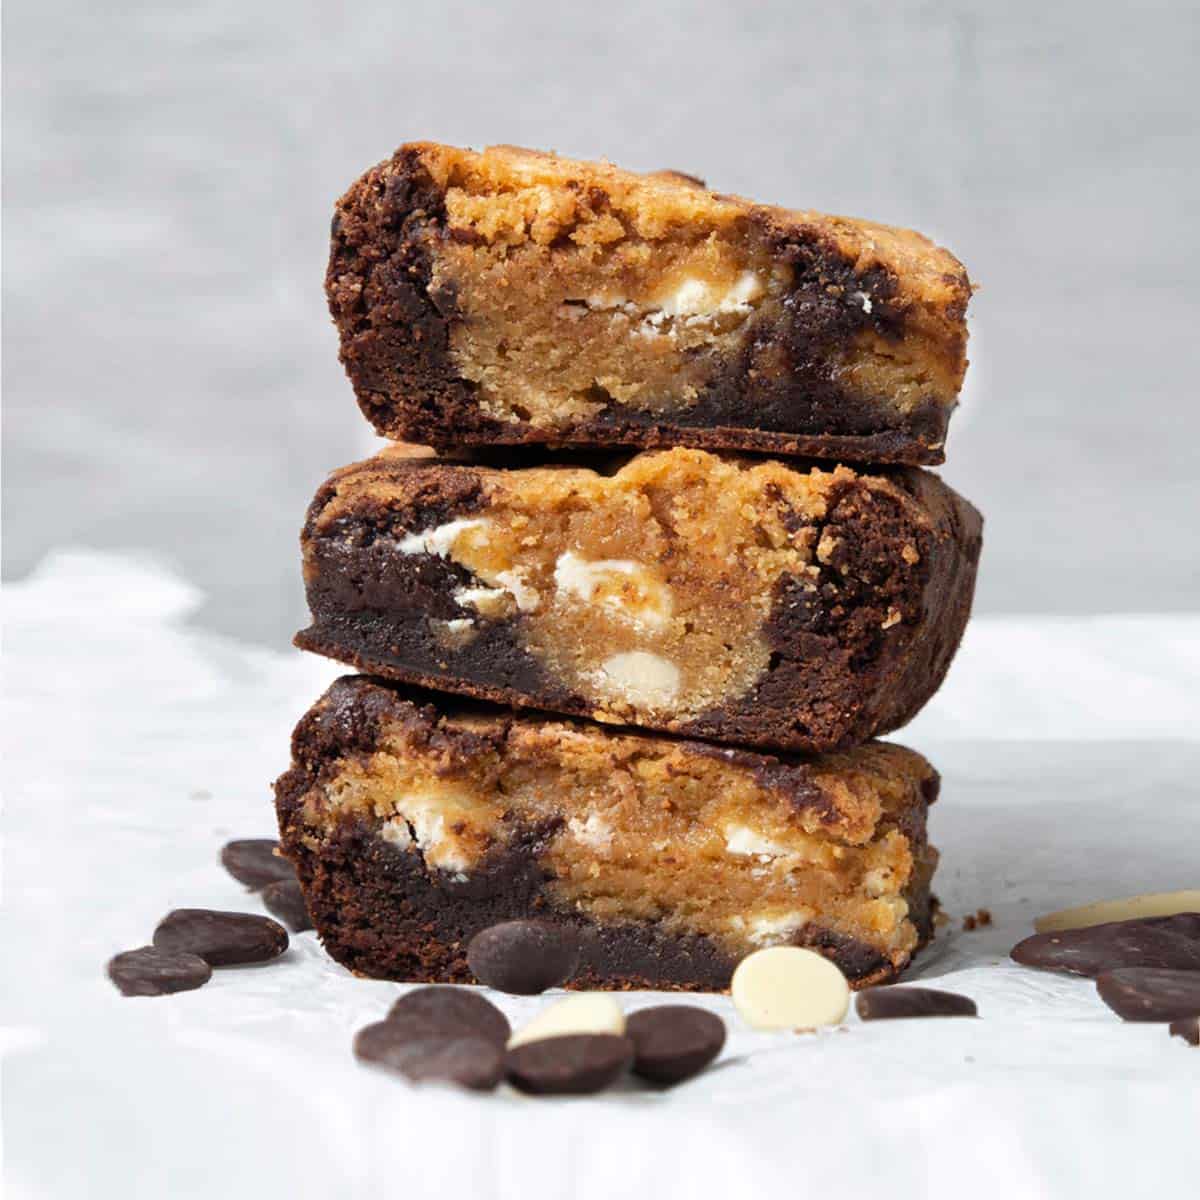 <p>Can´t choose between brownies vs. blondies? You don´t have to! This <a href="https://www.spatuladesserts.com/brownie-blondies/">Brownie Blondies</a> recipe might become your favorite, the perfect combination of chewy chocolate brownies and fudge blondies! It is rich, yet very well balanced in sweetness! A must-try recipe for brownie and blondie lovers!</p> <p><strong>Recipe: <a href="https://www.spatuladesserts.com/brownie-blondies/">Brownies Blondies</a></strong></p> <p>This post was originally on <a href="https://www.spatuladesserts.com/how-to-store-brownies/" rel="noreferrer noopener">Spatula Desserts</a>.</p>